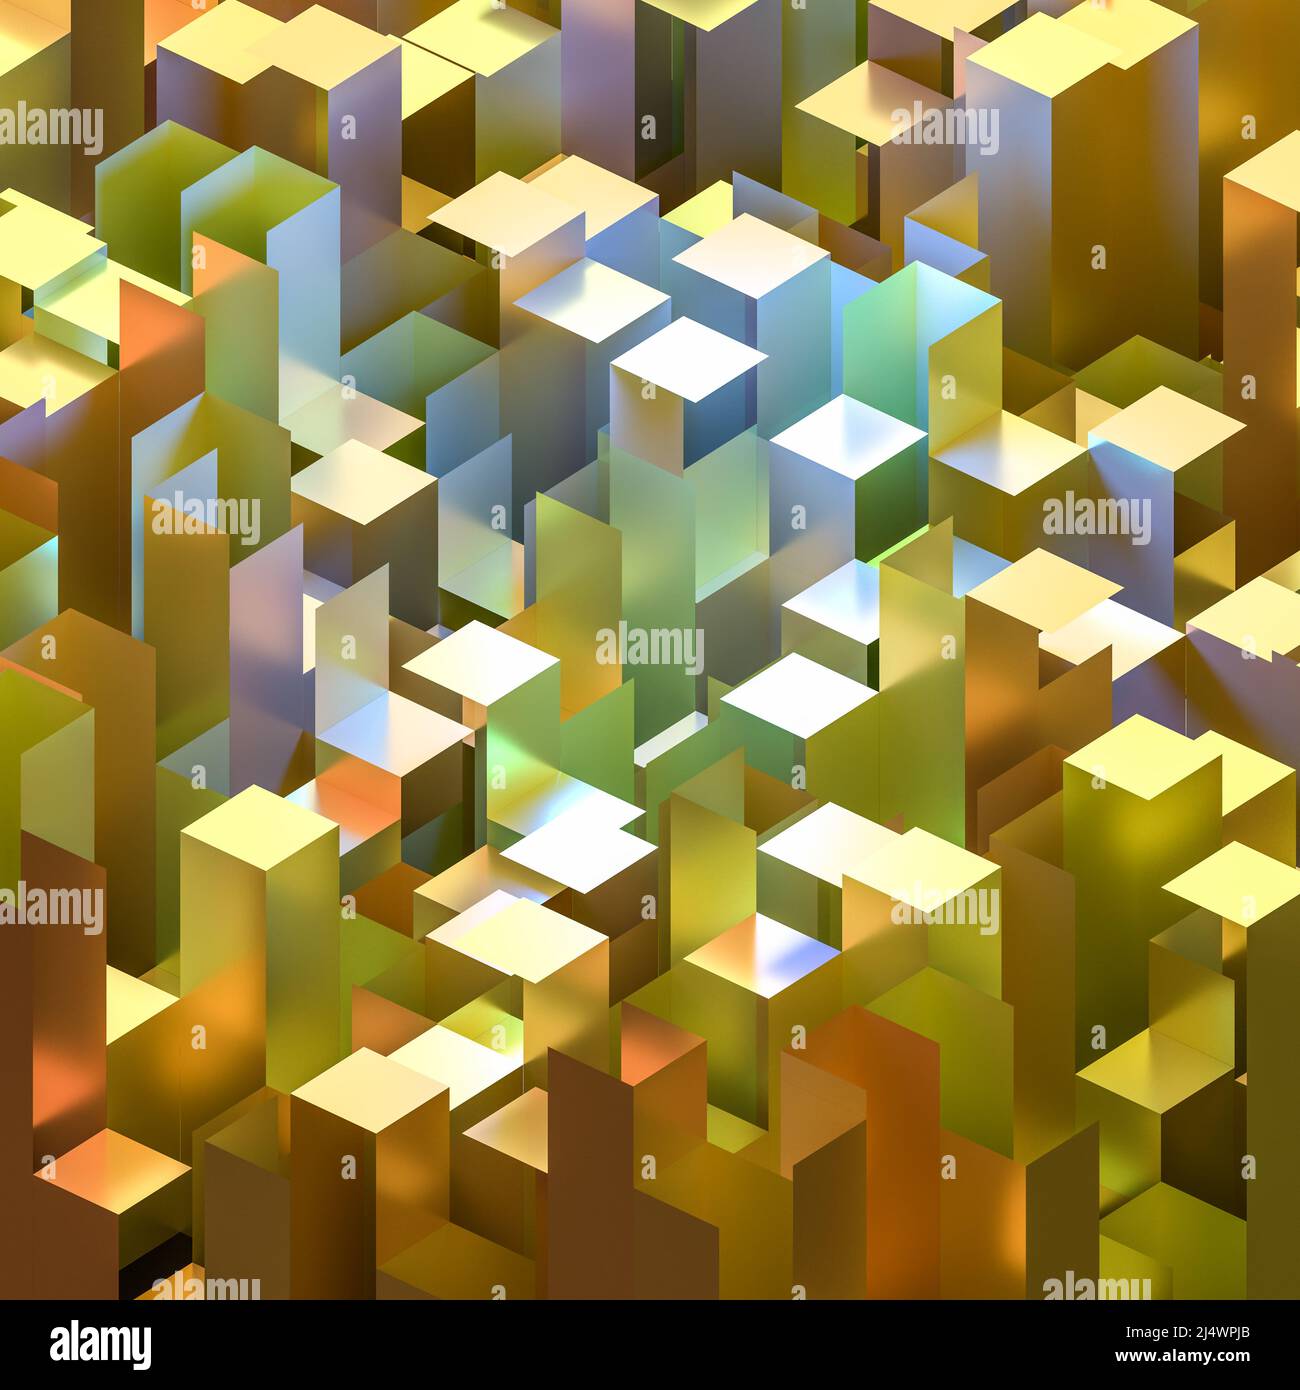 Abstract background of yellow and blue isometric cuboids depicting a cityscape Stock Photo